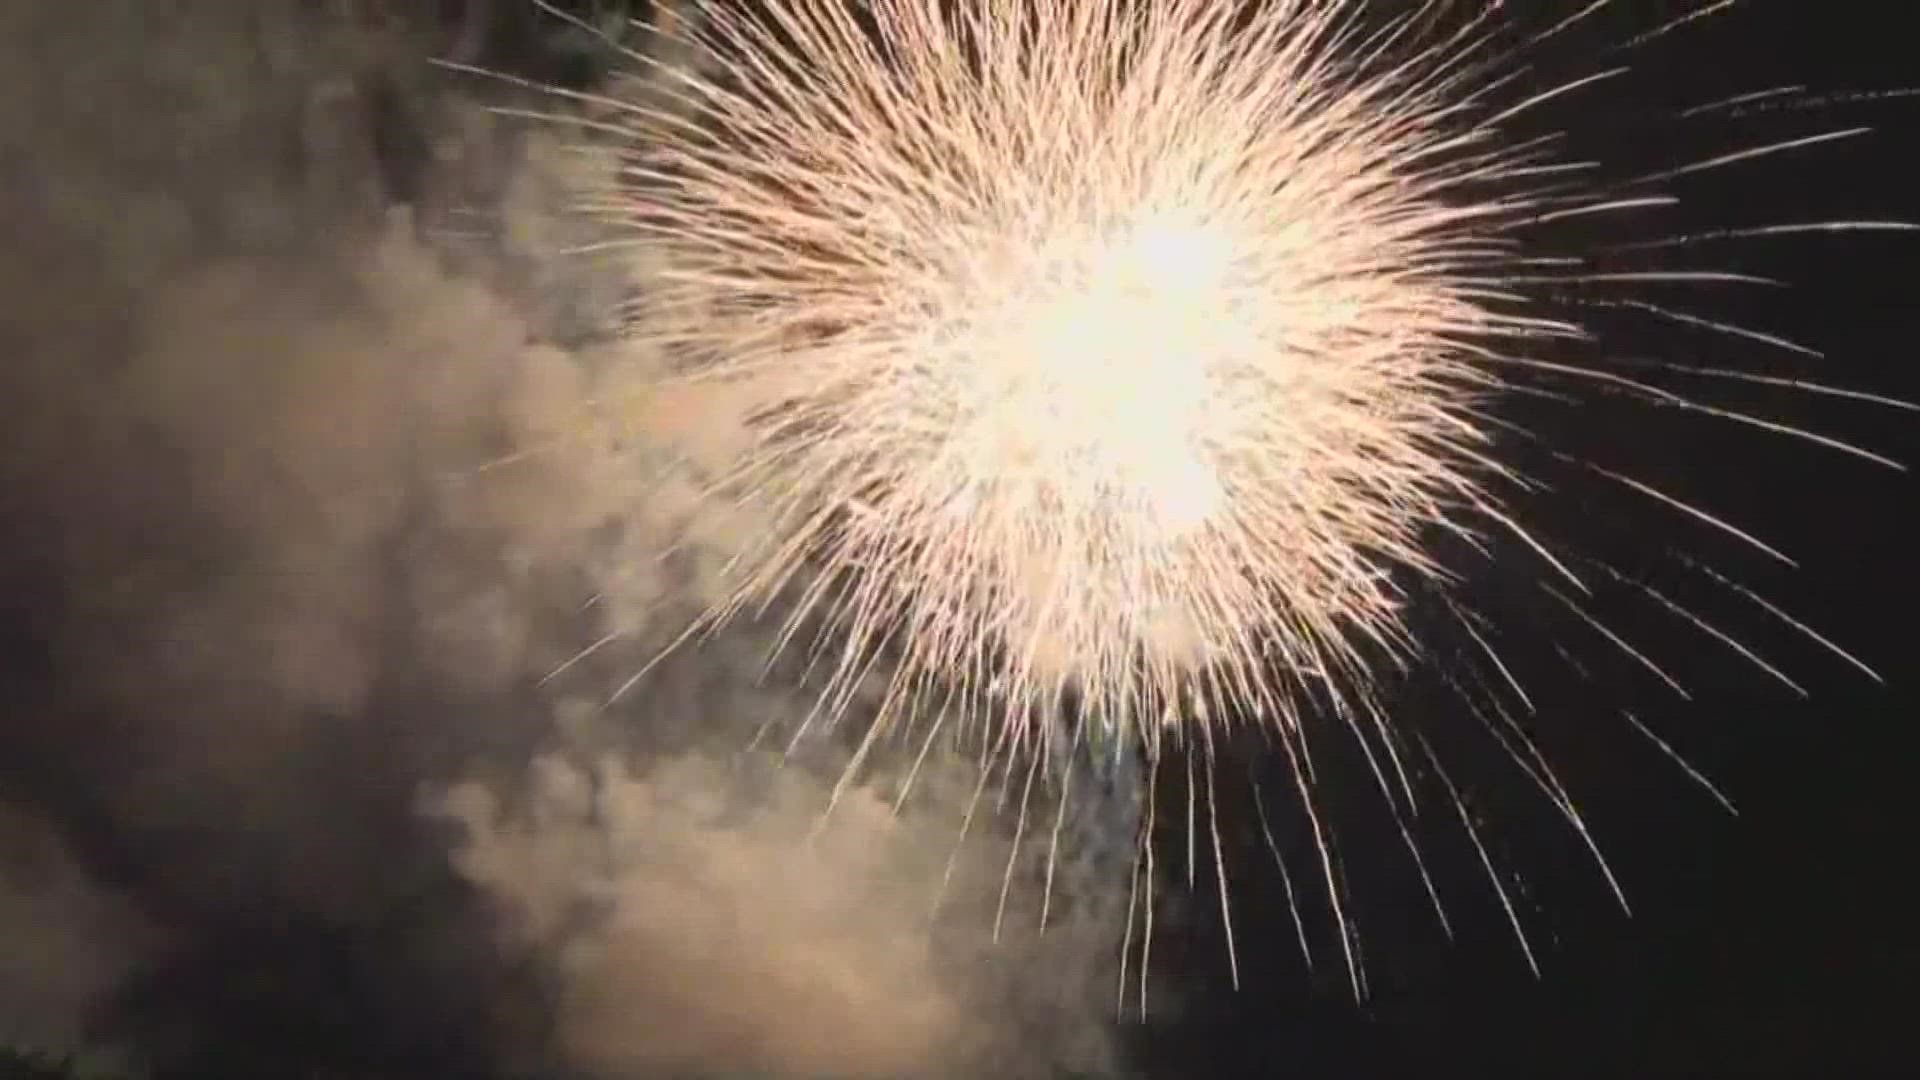 Fire officials are reminding Mainers of some important fireworks safety tips for the upcoming holiday